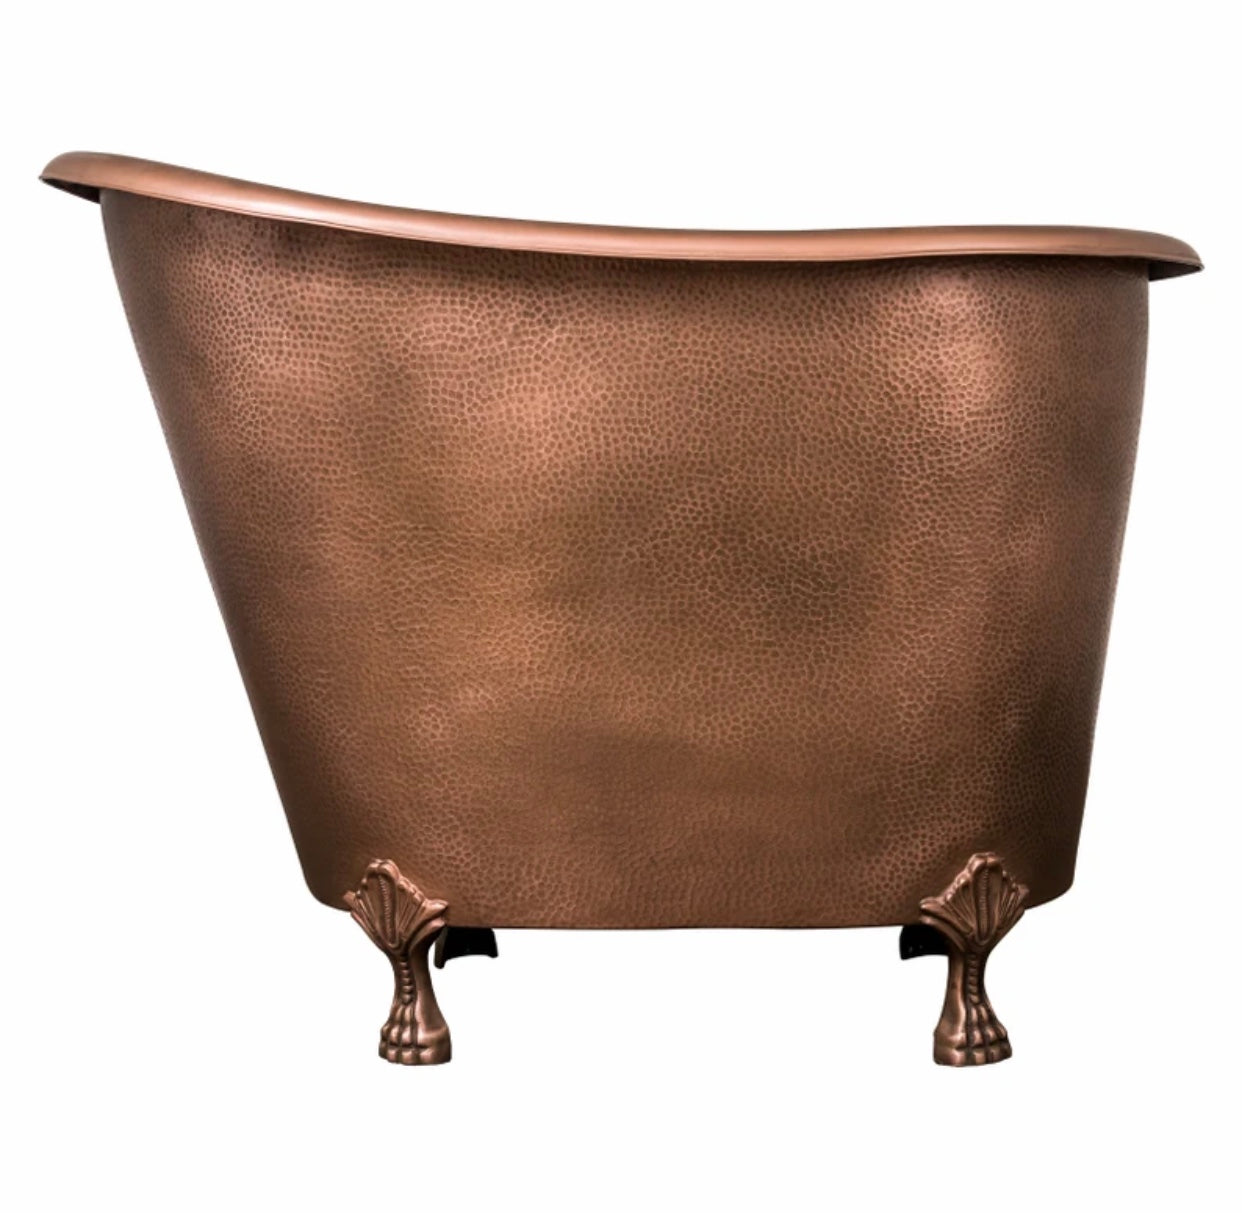 Antique Copper Hammered Japanese Soaking Claw Tub